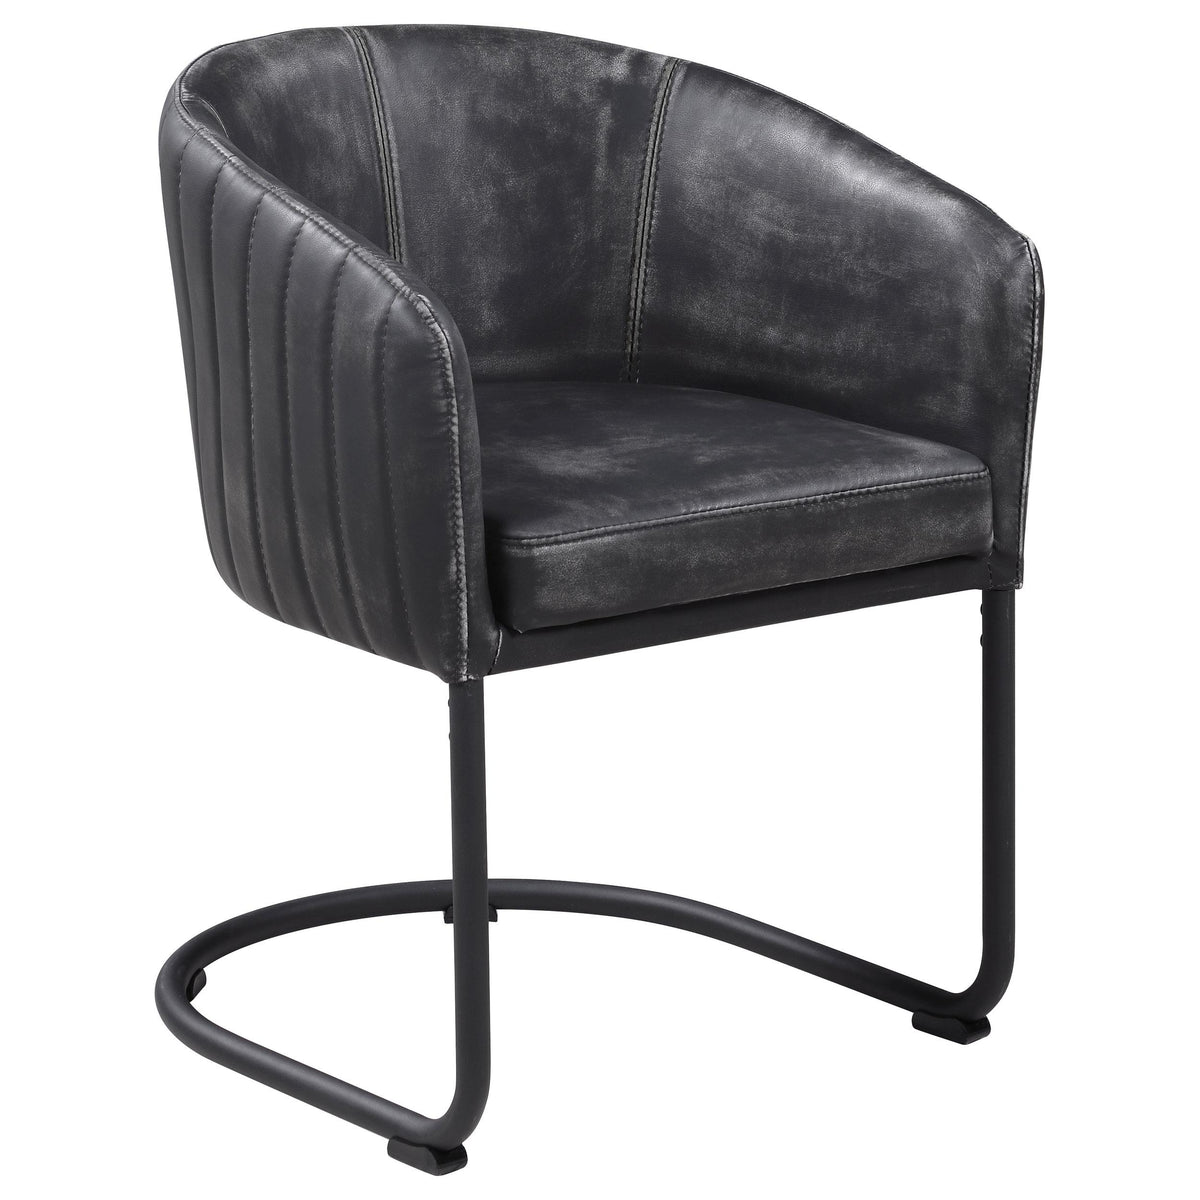 Banner Upholstered Dining Chair Anthracite and Matte Black Banner Upholstered Dining Chair Anthracite and Matte Black Half Price Furniture